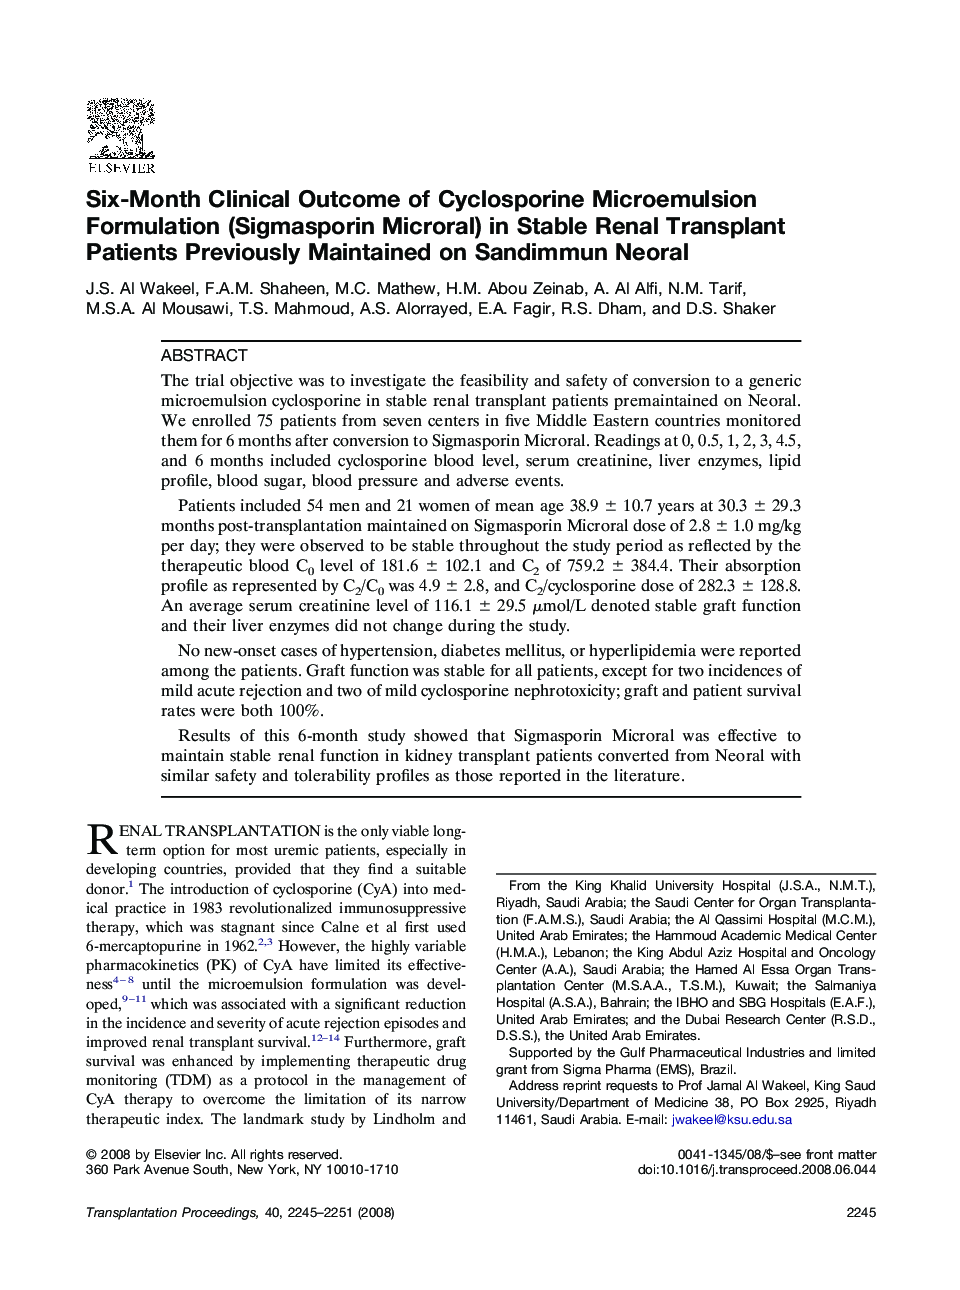 Six-Month Clinical Outcome of Cyclosporine Microemulsion Formulation (Sigmasporin Microral) in Stable Renal Transplant Patients Previously Maintained on Sandimmun Neoral